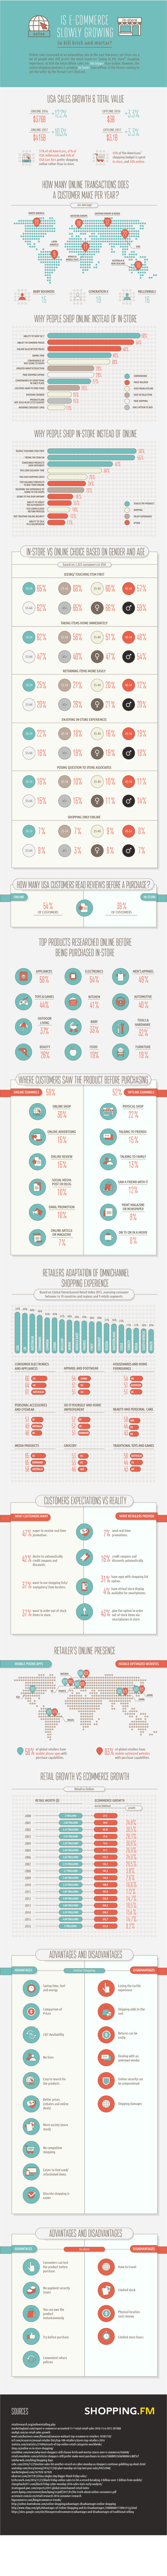 The growth of Online Stores [Infographic]